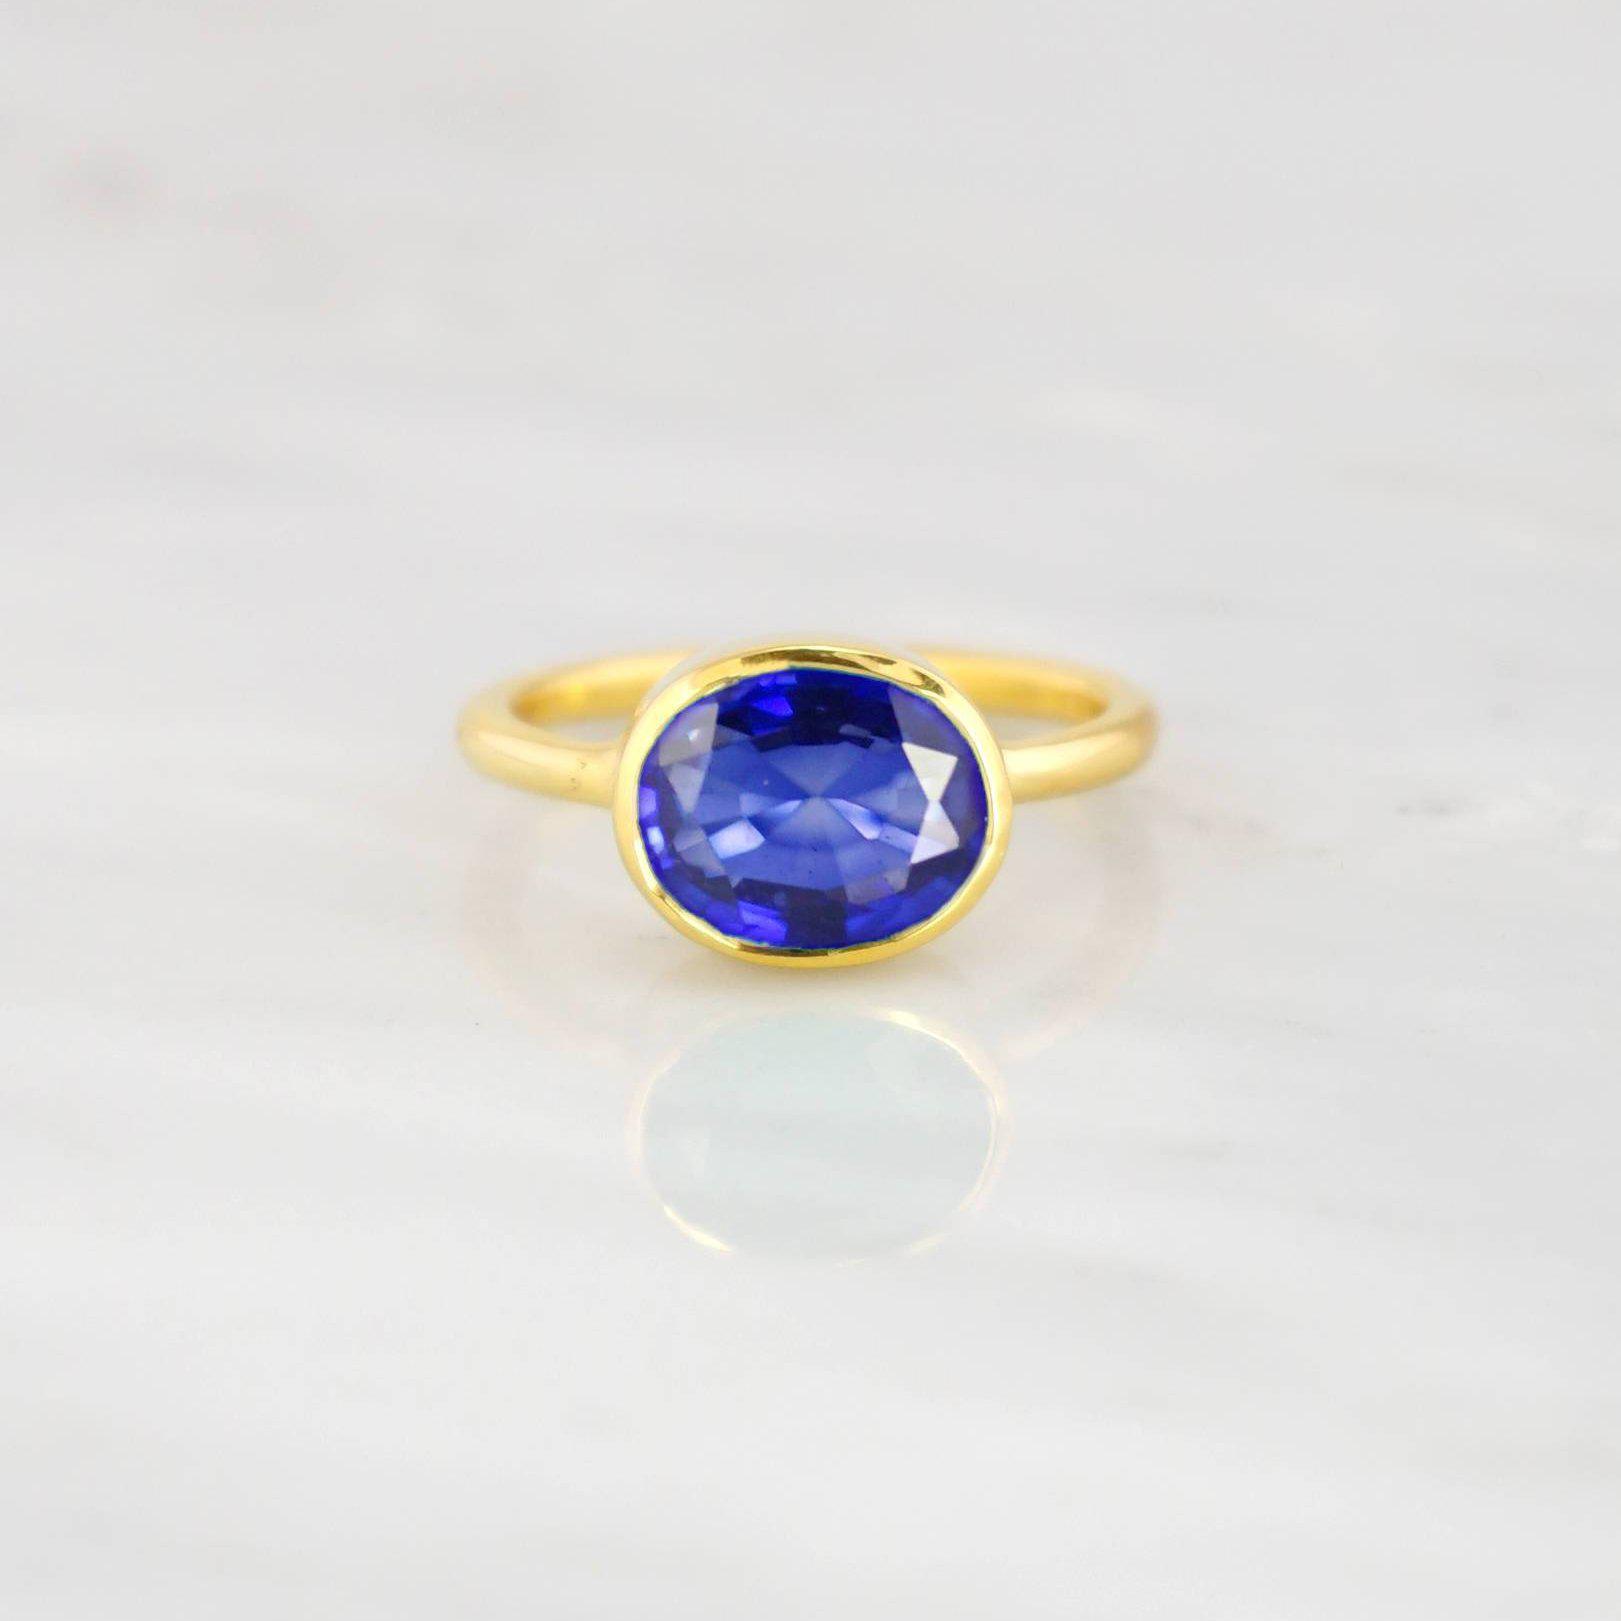 Blue Sapphire Ring, Gold and Silver Stackable ring, September Birthstone Ring, Stacking ring, Blue Gemstone Ring, Ceylon Sapphire ring